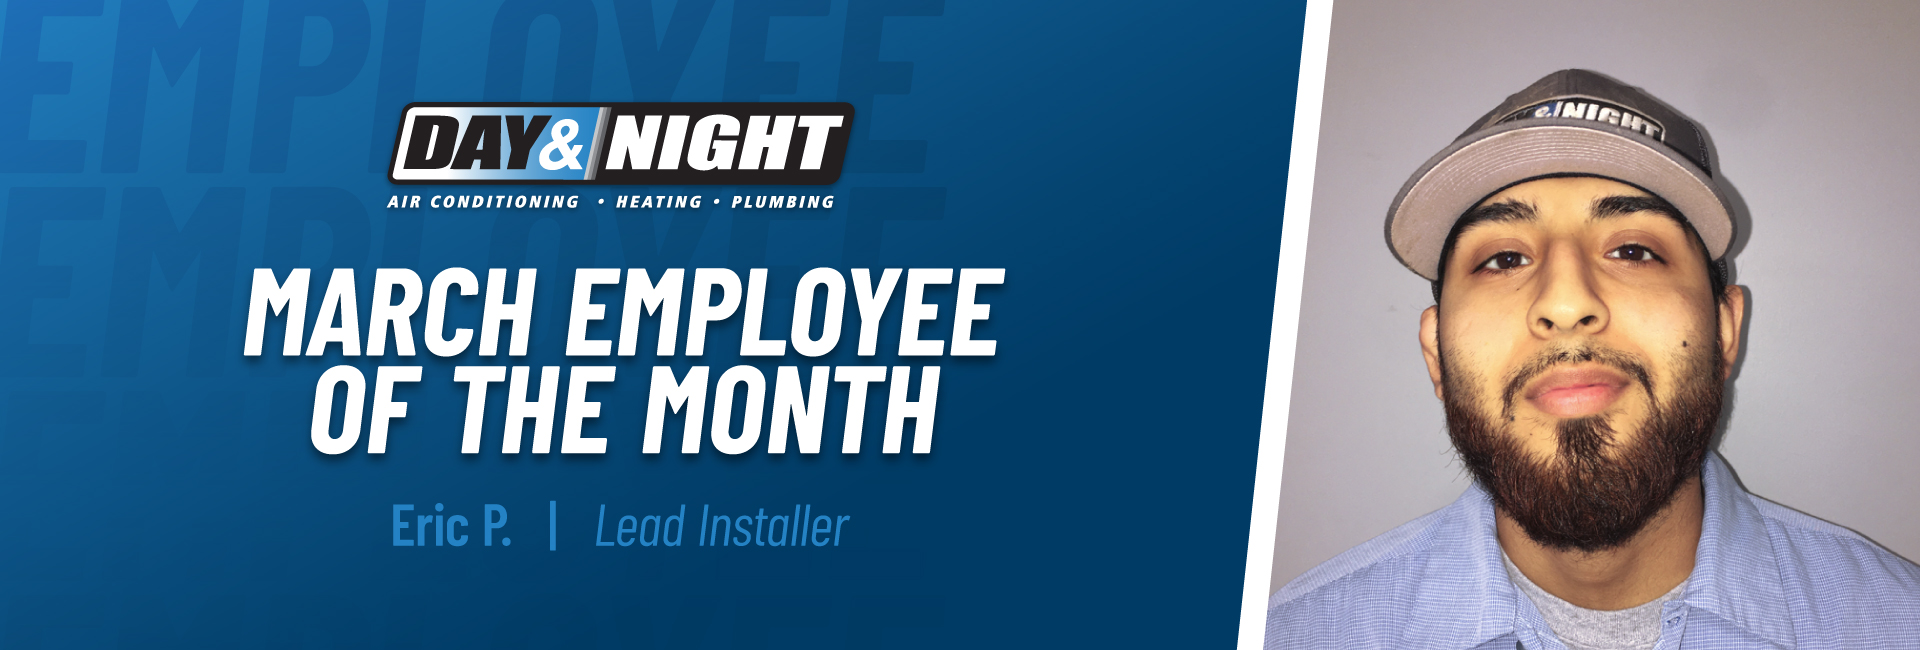 Employee of the Month Day & Night Air